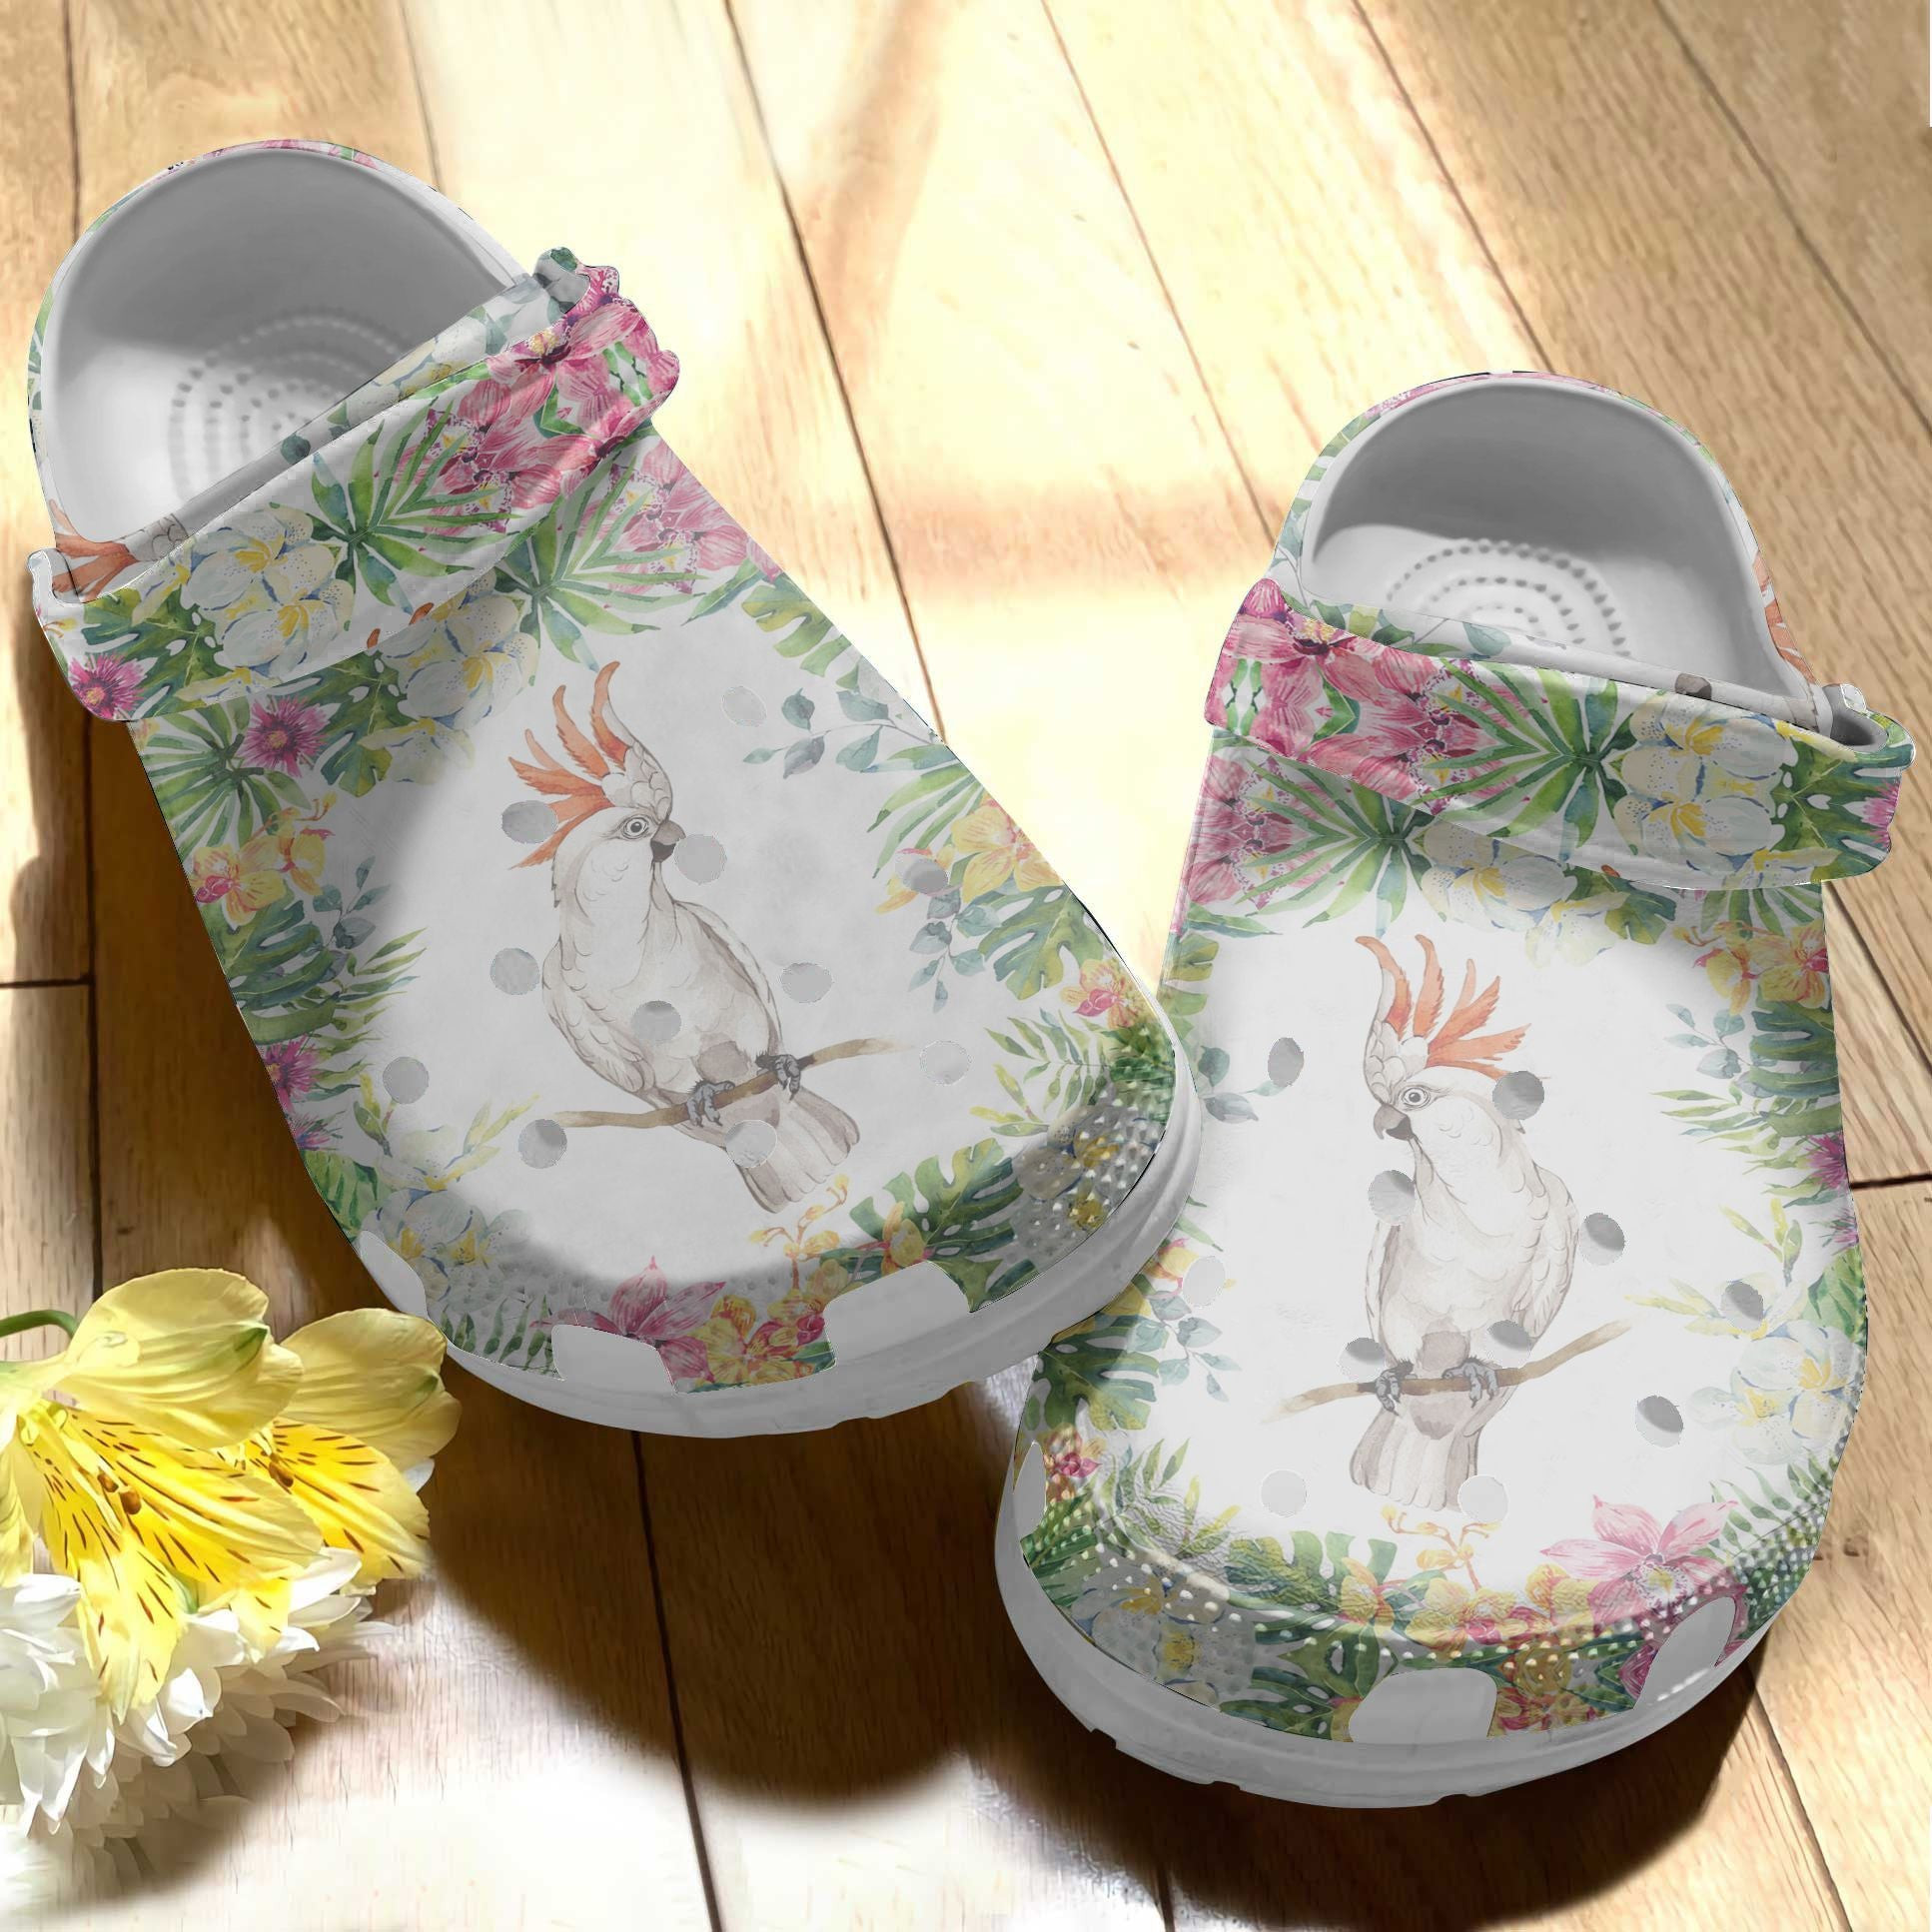 Birds Flower White Parrot Flower Crocs Shoes - Cockatoo Shoes Crocbland Clog Birthday Gifts For Woman Daughter Mother